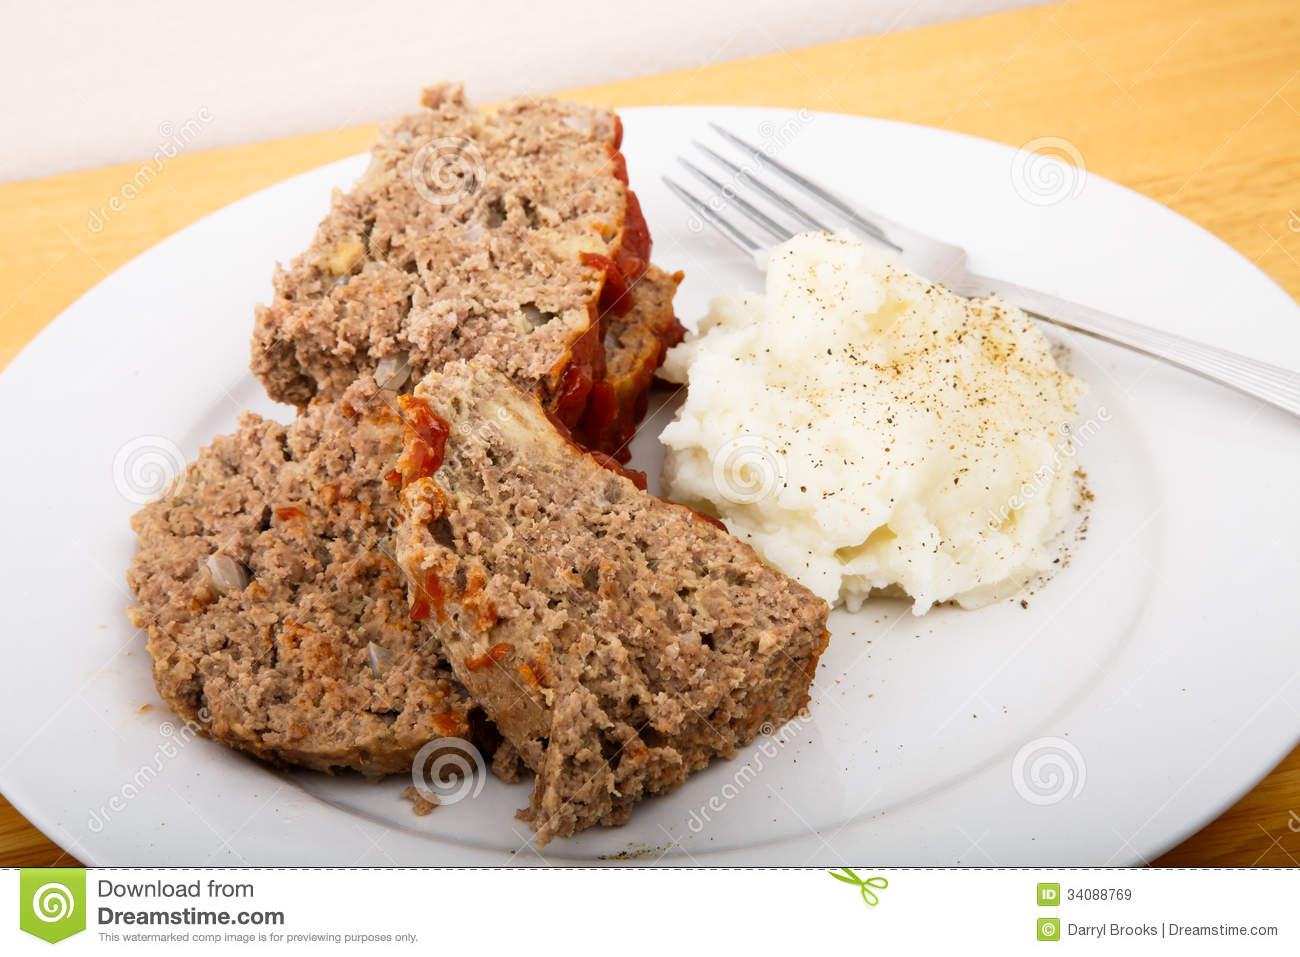 Meatloaf And Mashed Potatoes Royalty Free Stock Images   Image